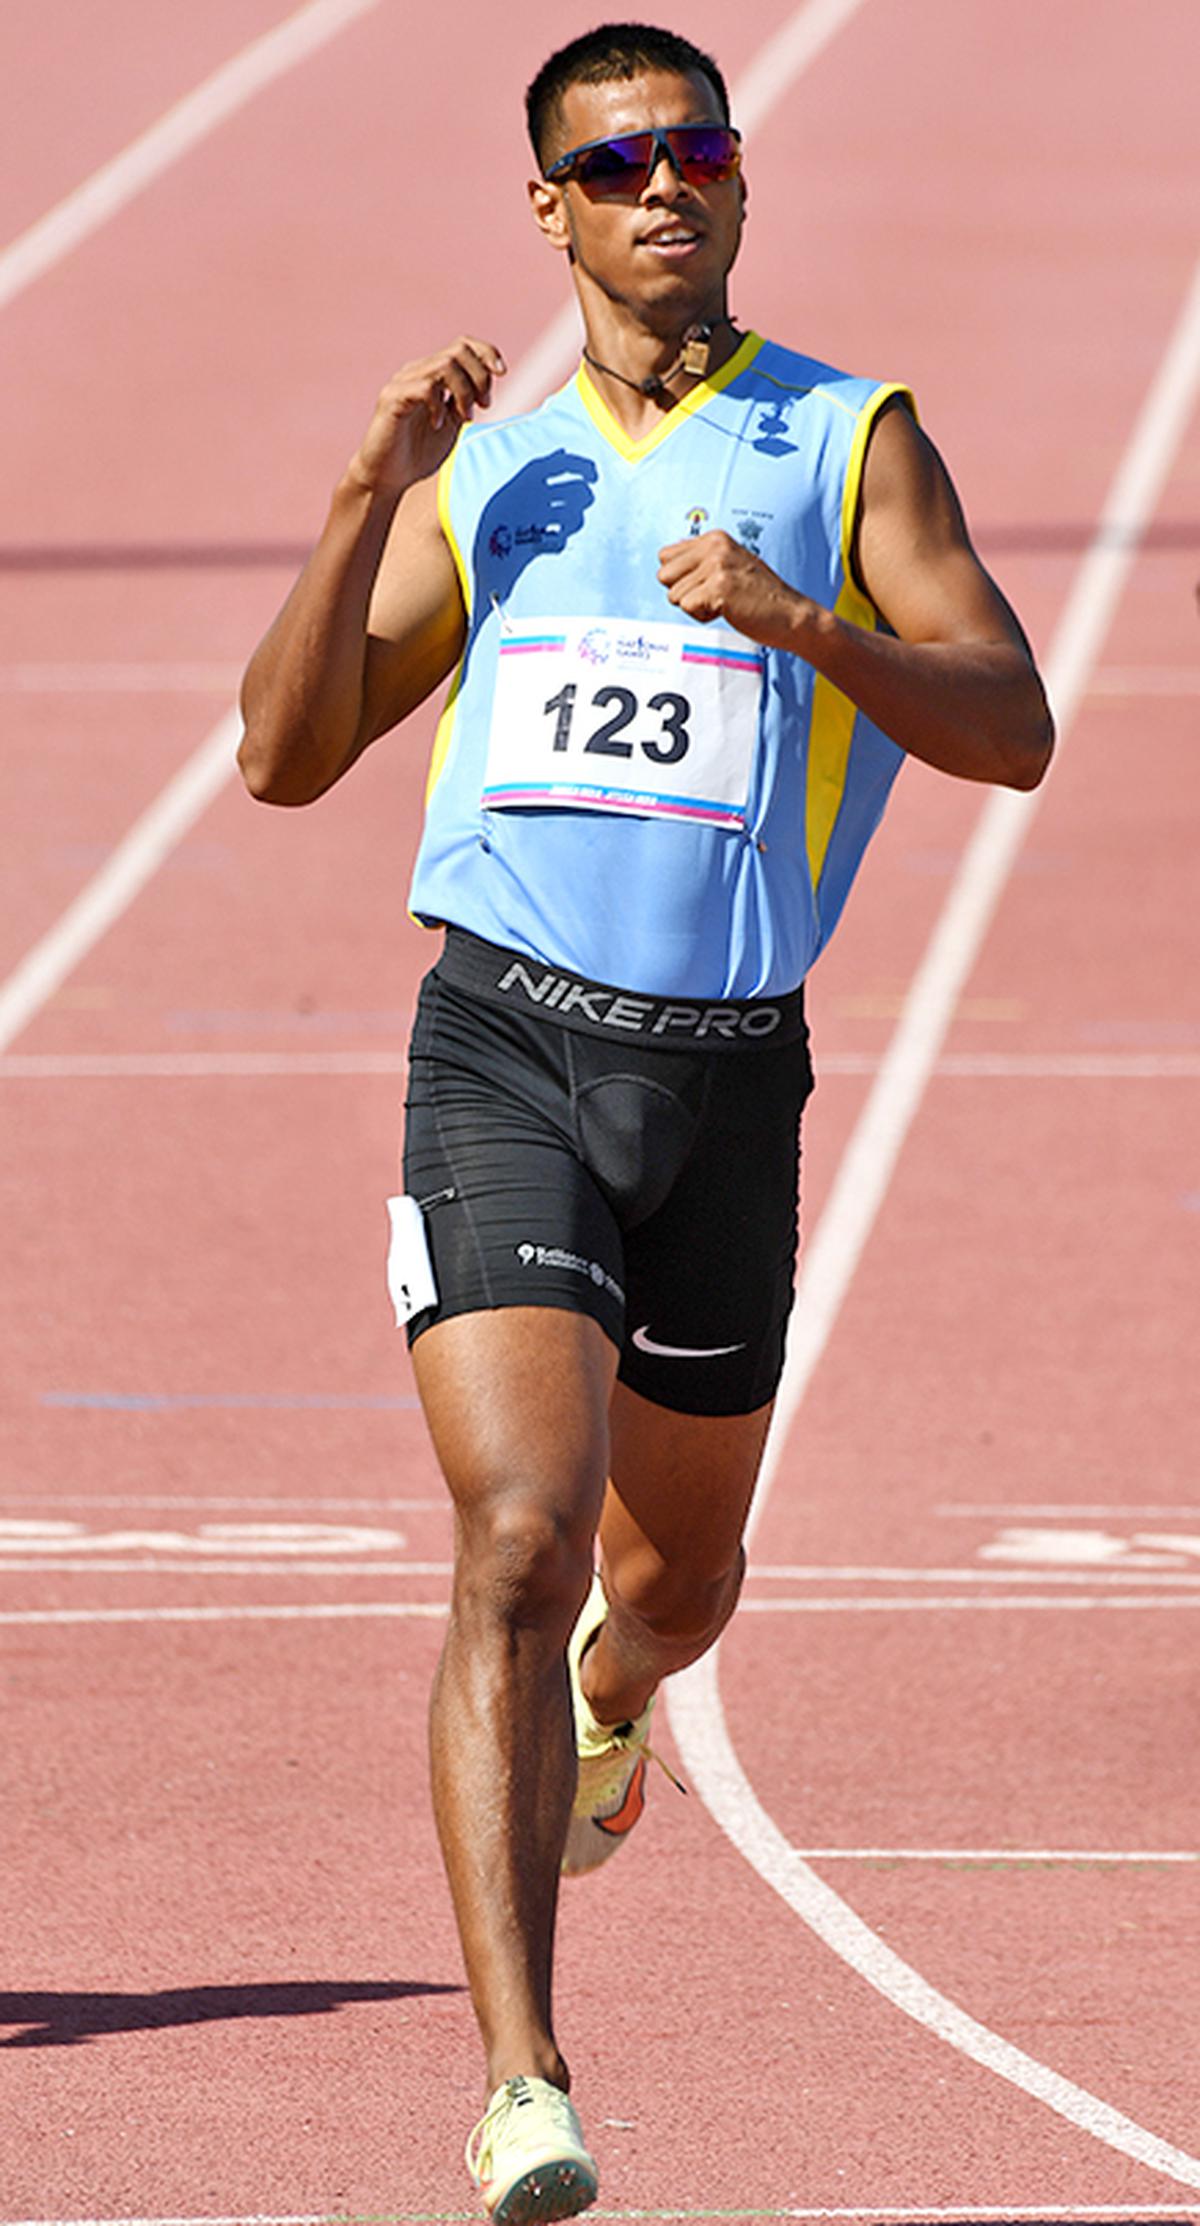 Amlan Borgohain of Assam during the 200M heats in the track and field events held at IIT Gandhinagar, during the 36th National Games in Gujarat. 